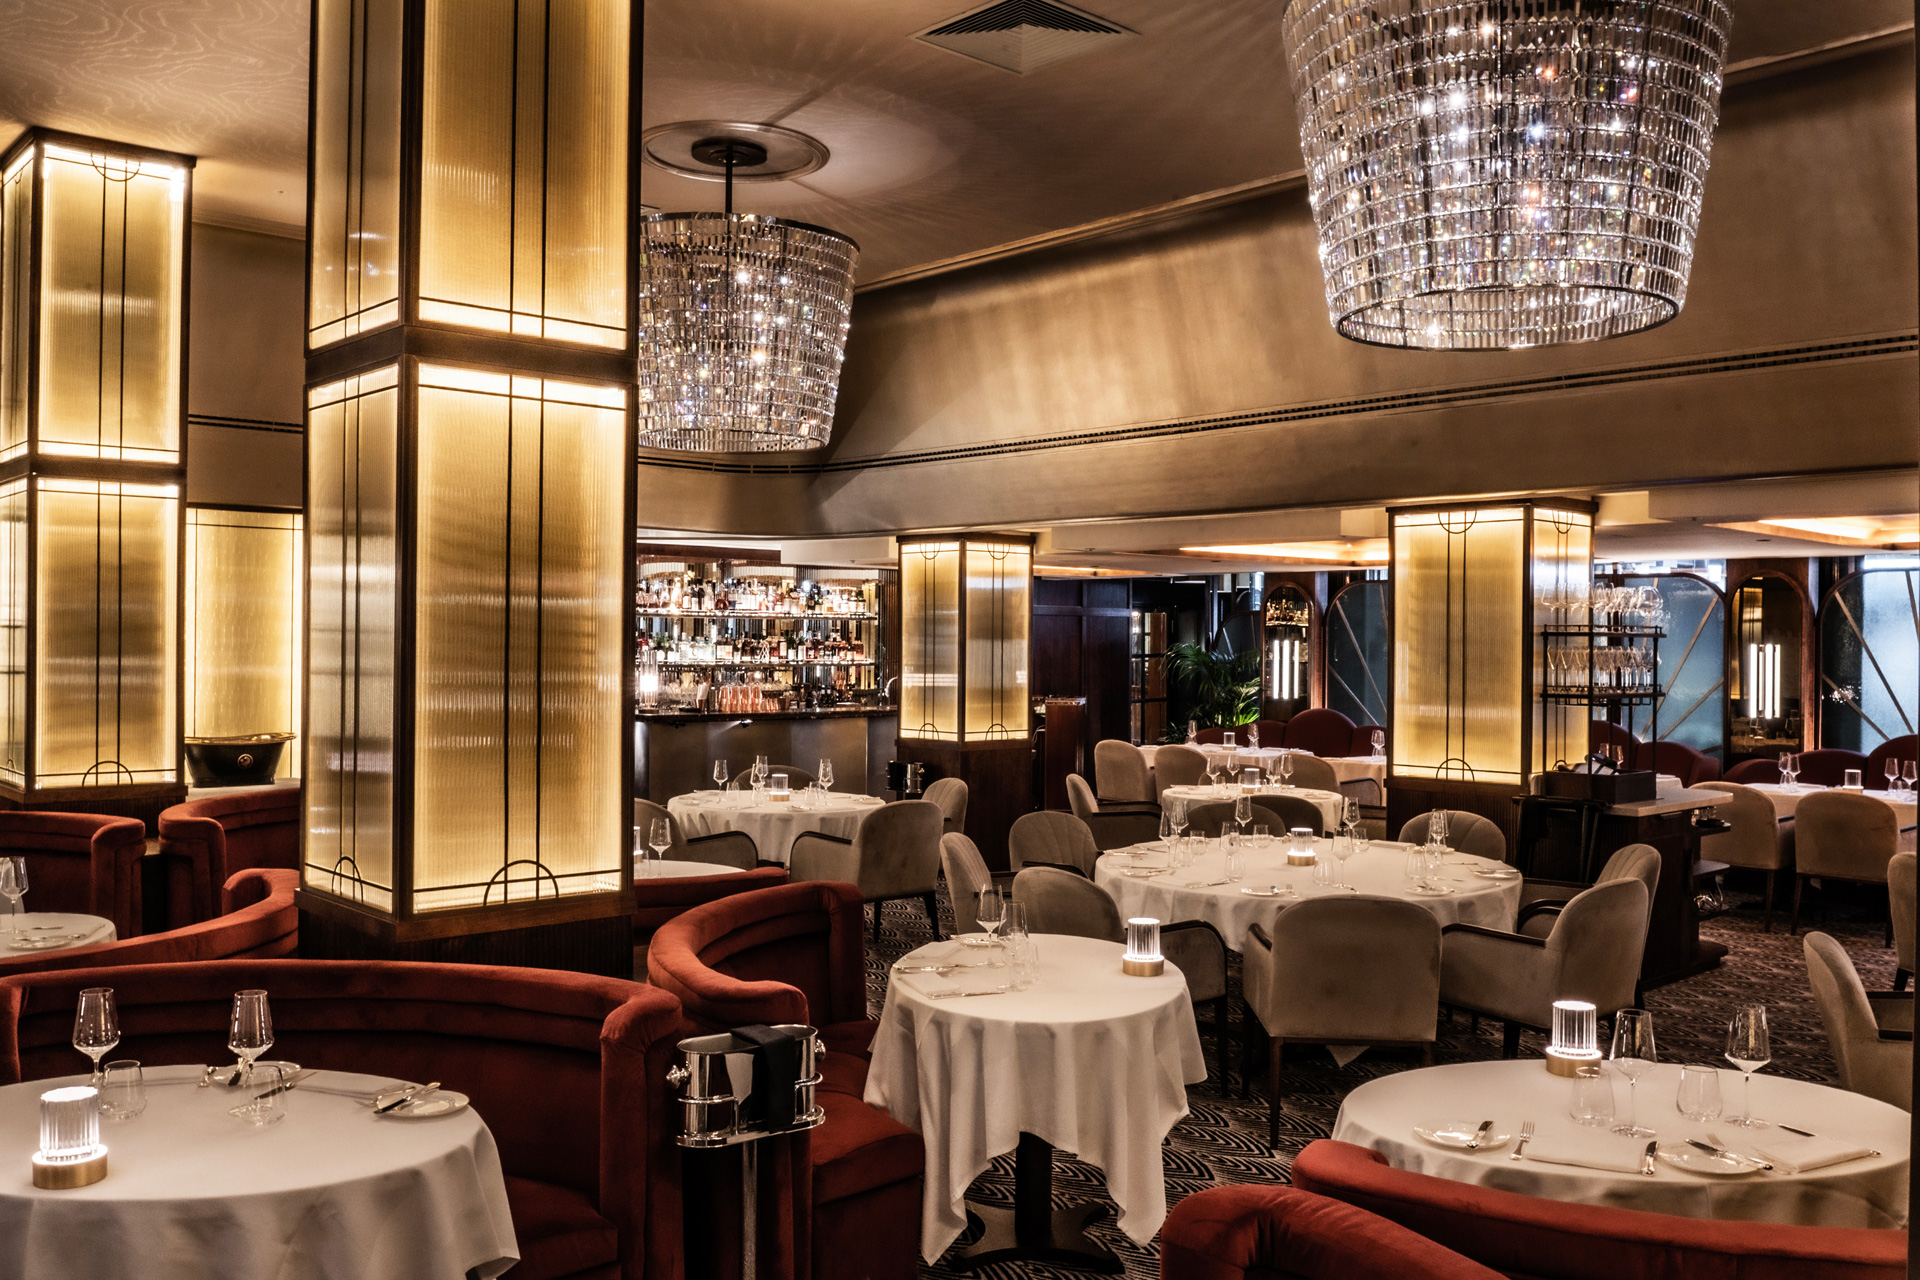 Dining room at The Savoy Grill